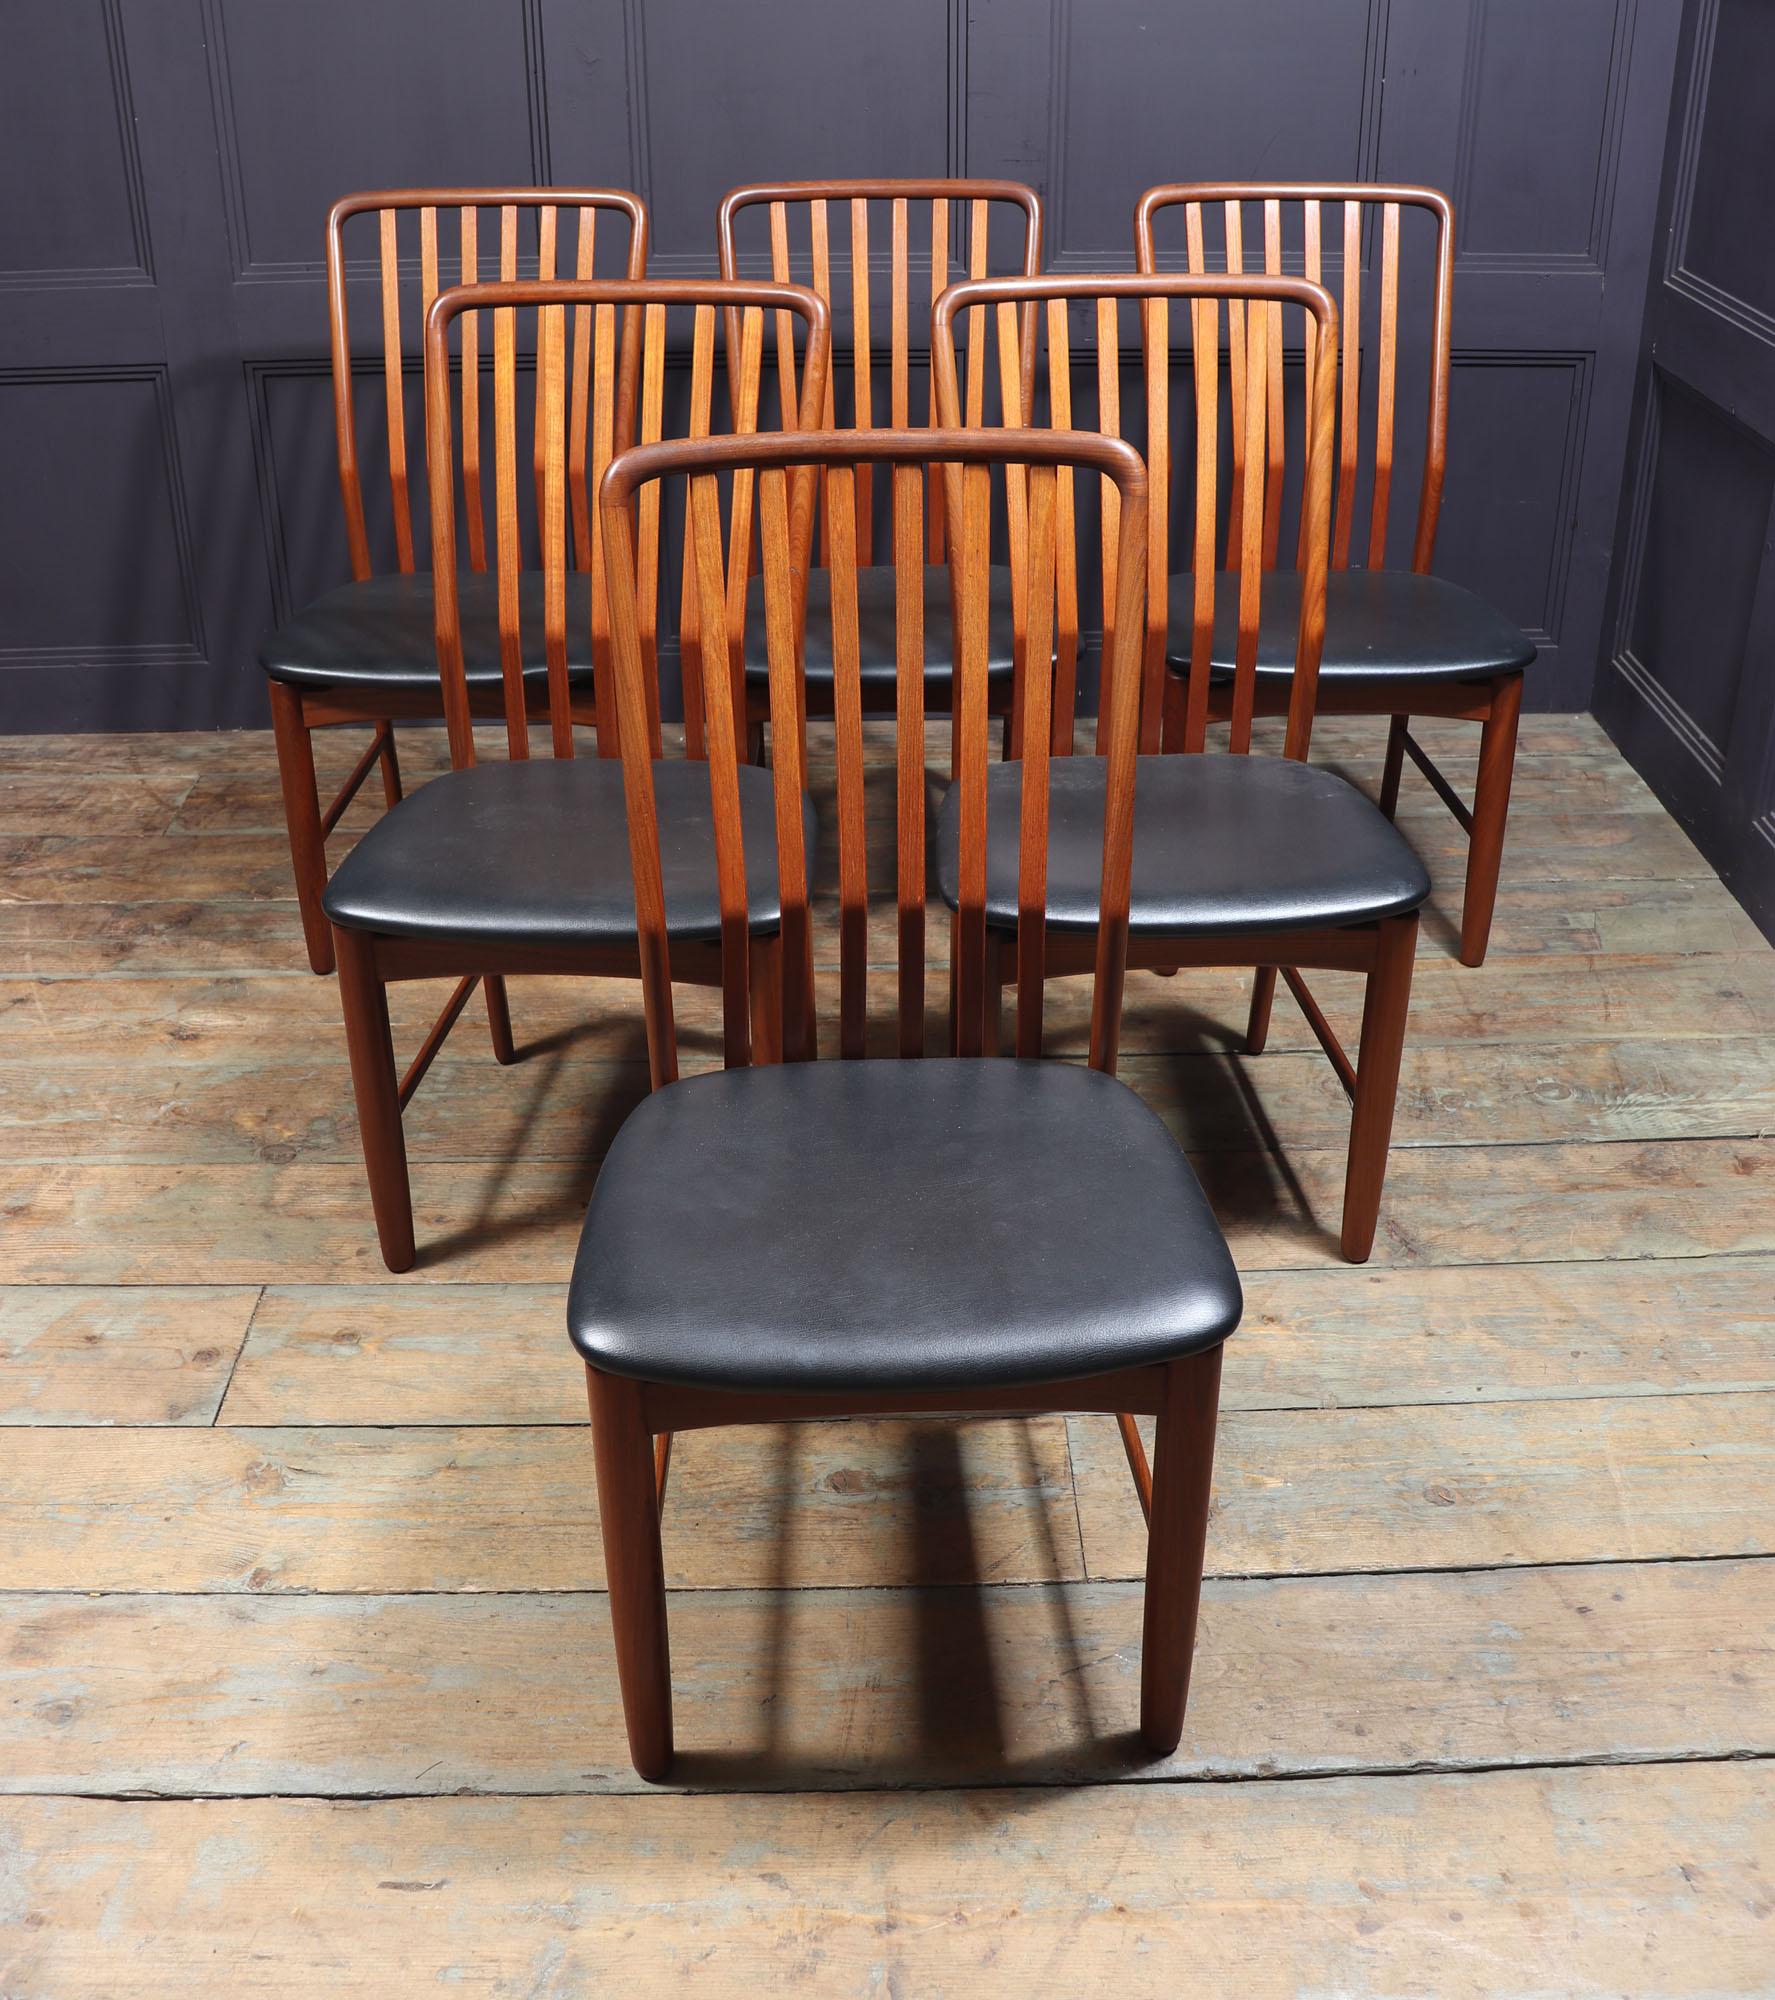 SVEND MADSEN FOR MORREDI
Set of six dining chairs in solid teak Designed by Svend Madsen and produced by Morredi in the early 1960’s, rarely seen in the Uk as these were shipped straight from Denmark to the states in this period. The chairs are